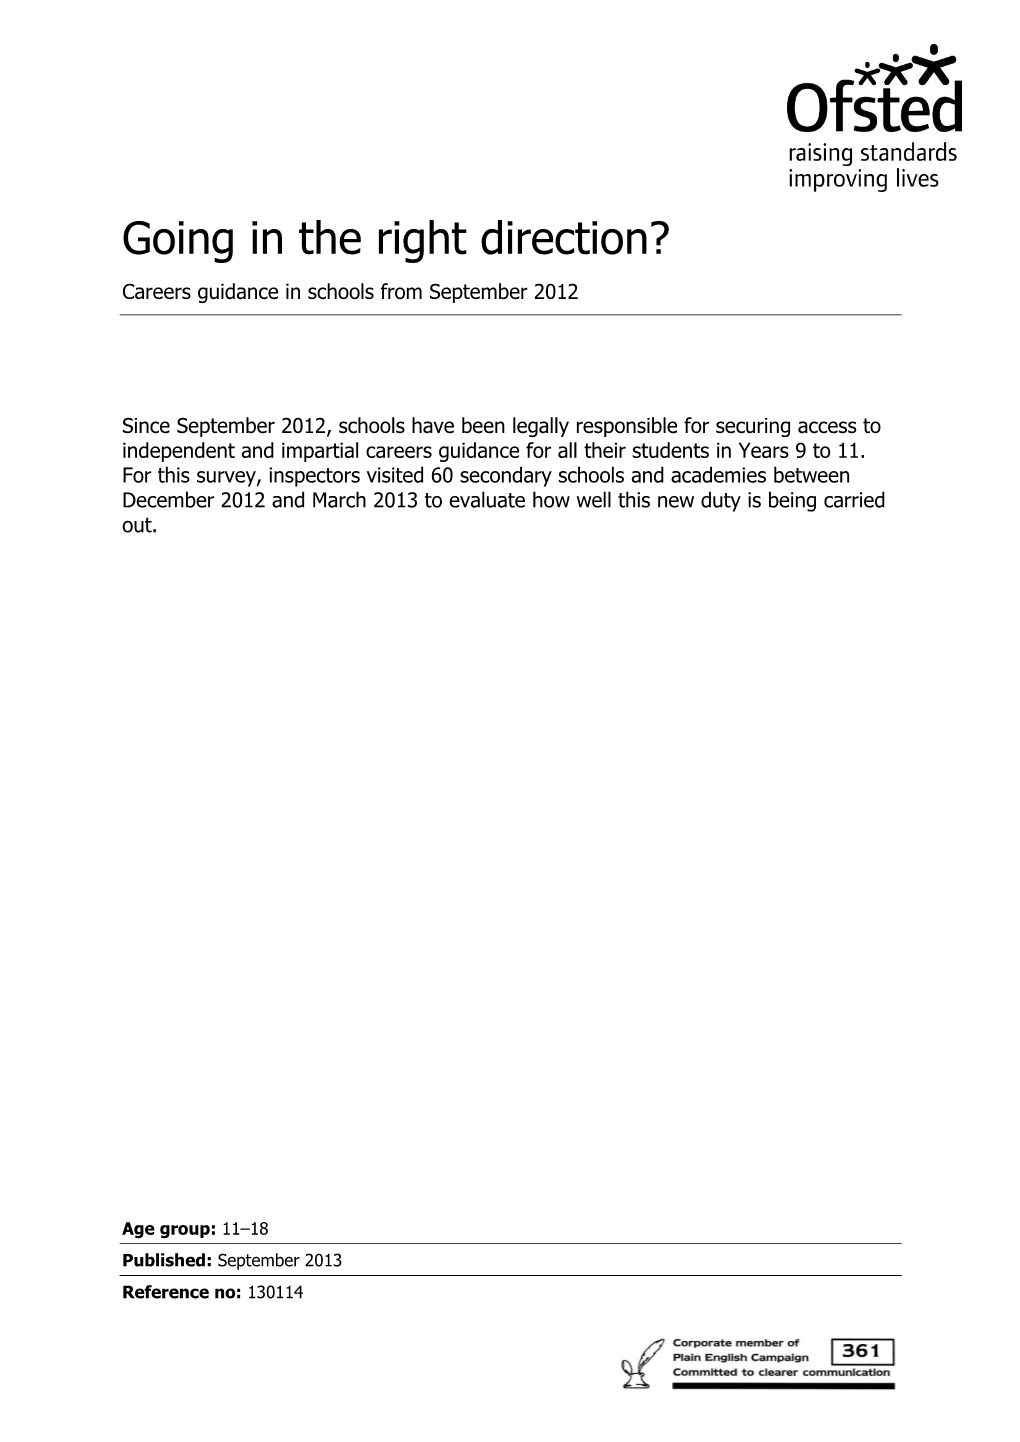 Going in the Right Direction? Careers Guidance in Schools from September 2012